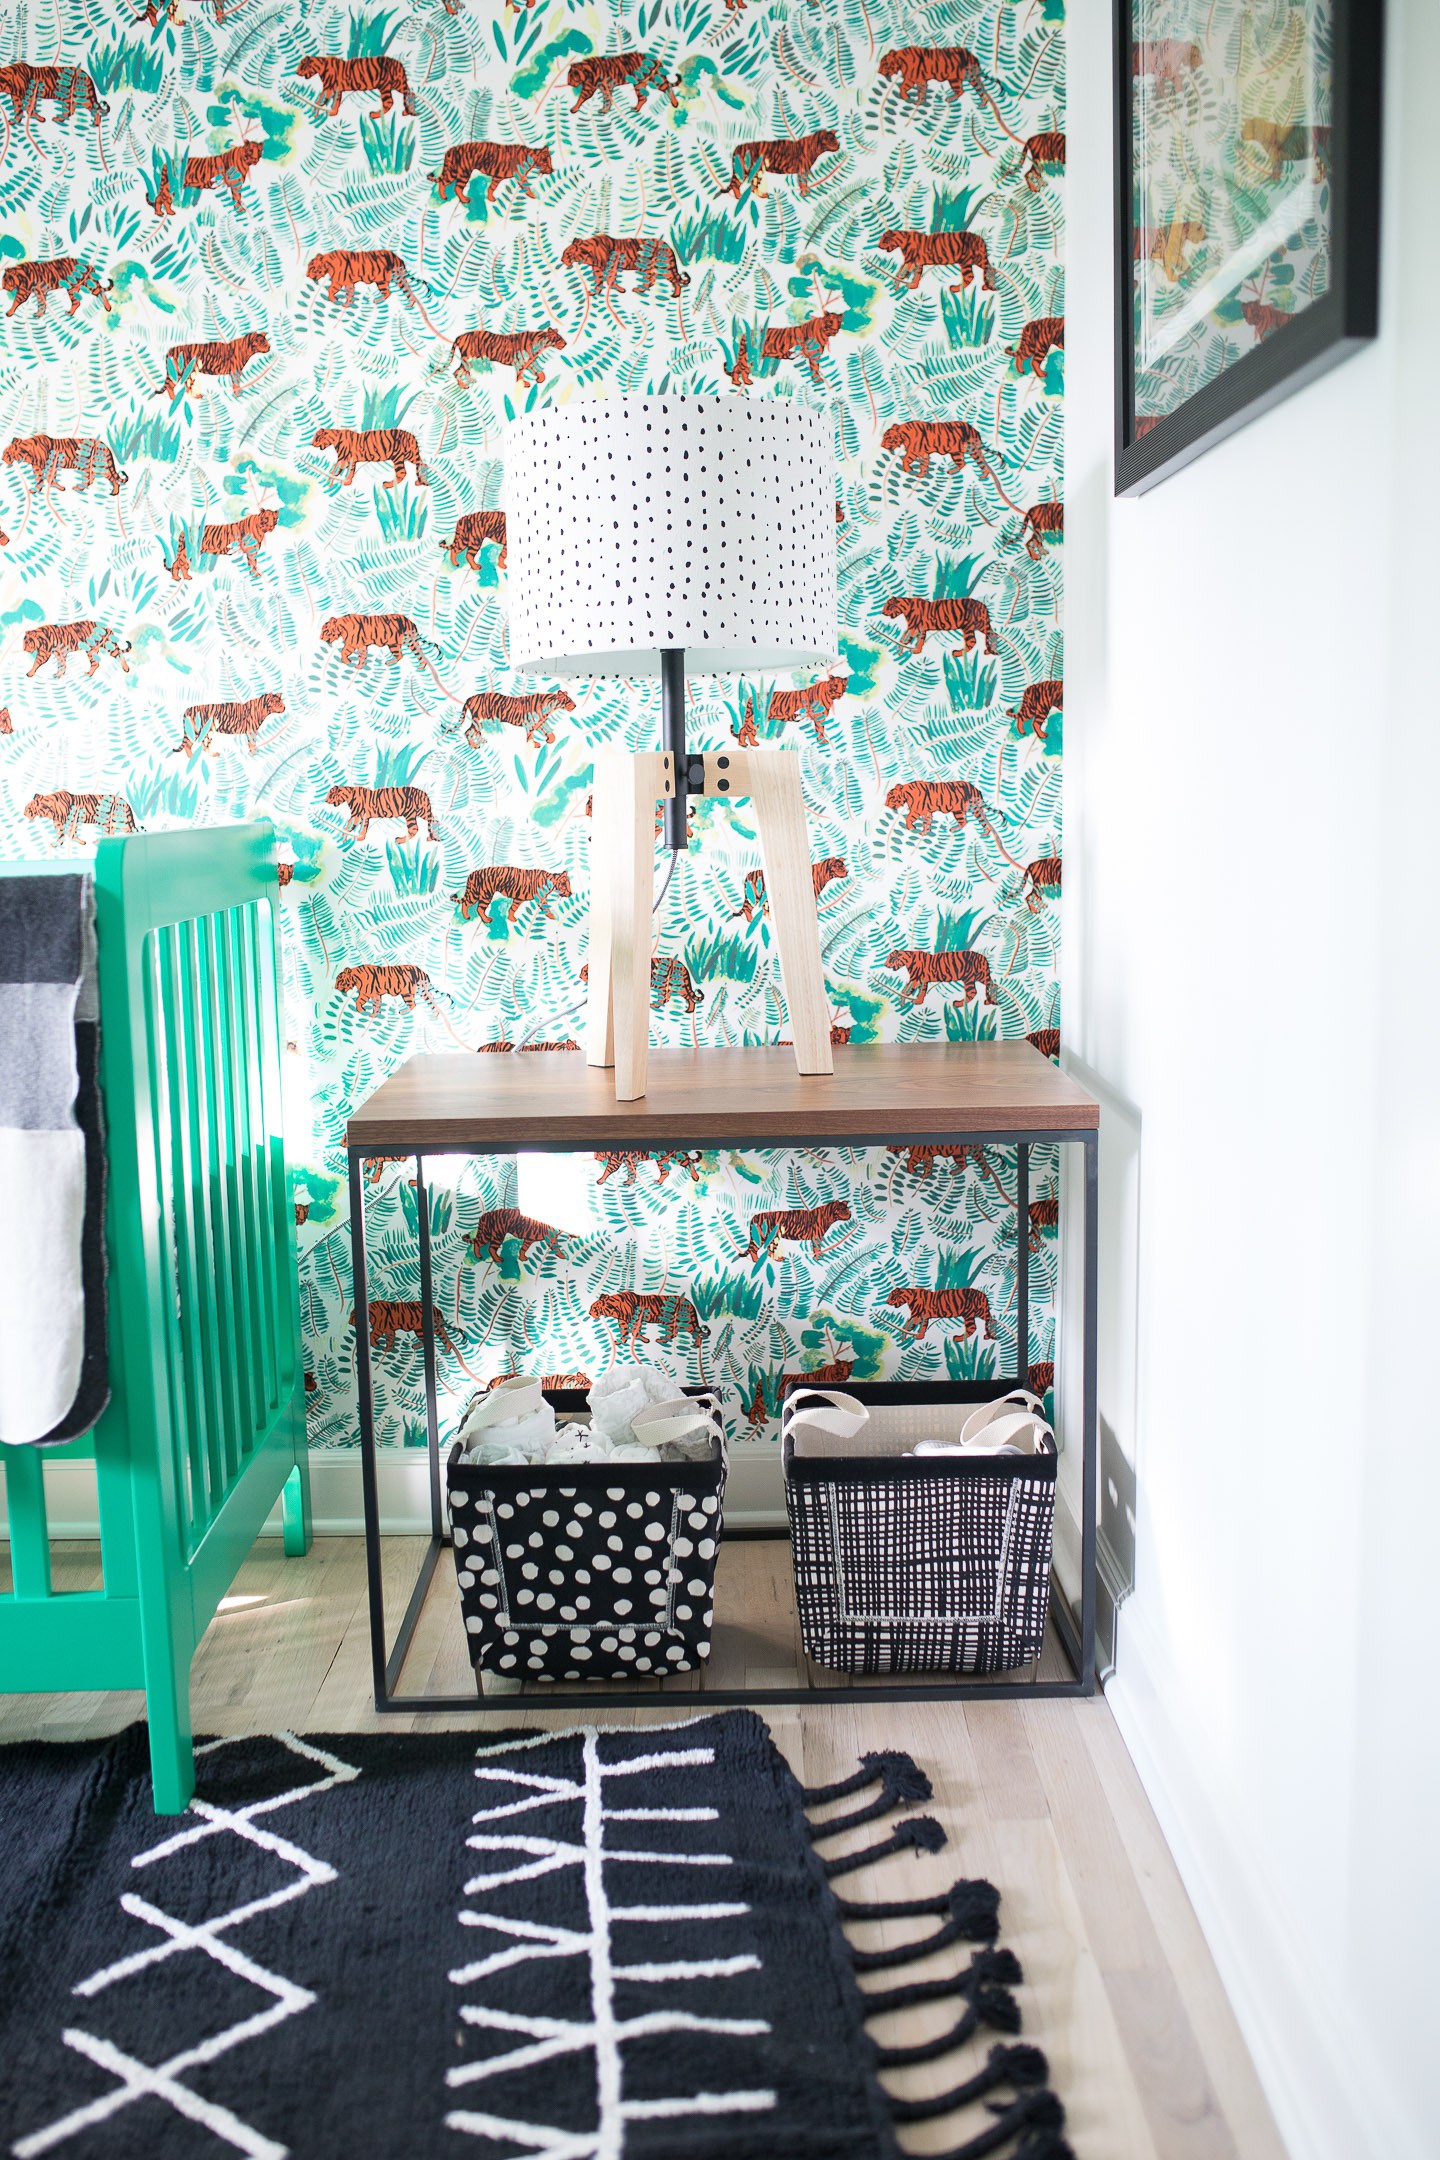 Major Martino's nursery features black and white tribal patterns with kelly green accents and a vibrant tiger wallpaper